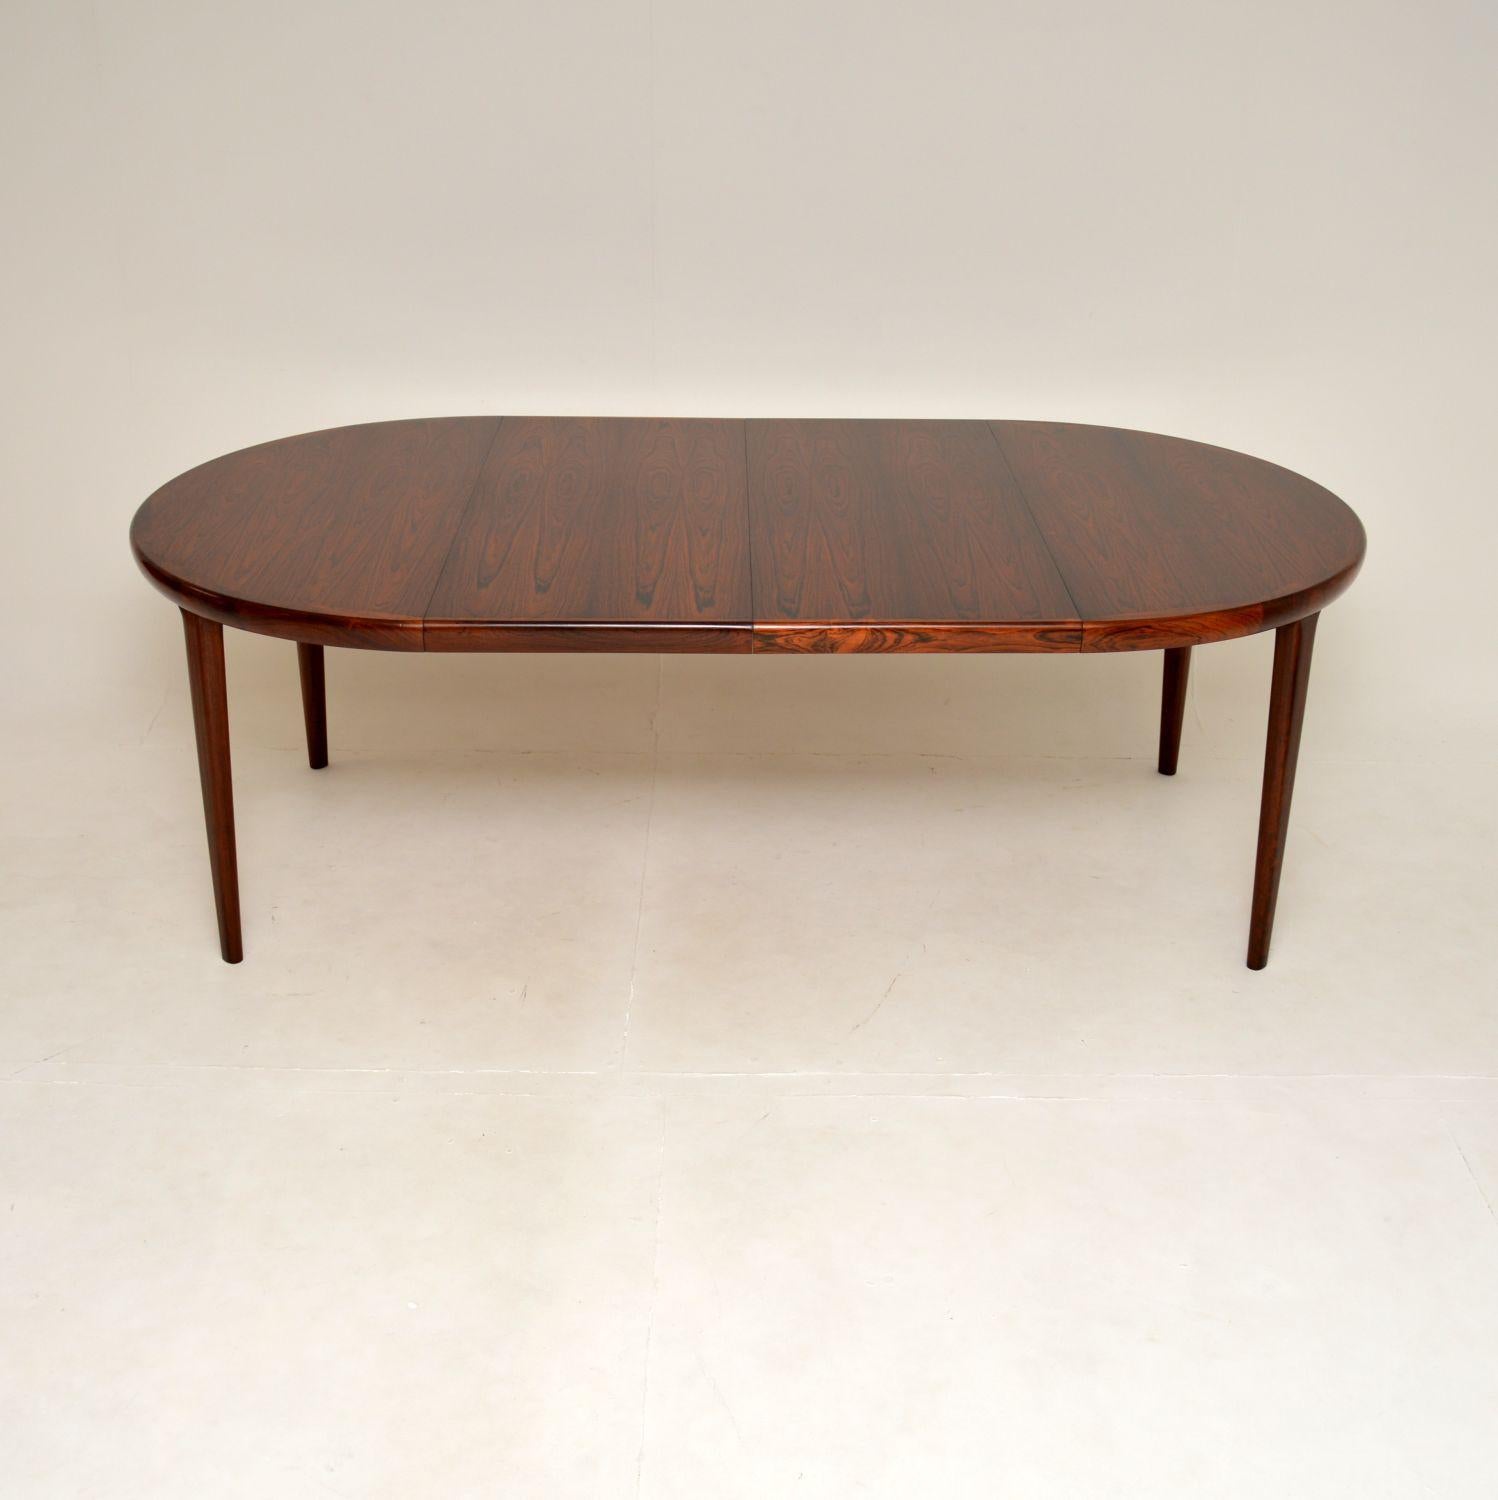 A stunning Danish vintage extending dining table. This was made by VV Mobler, it dates from the 1960’s.

The quality is outstanding, this is extremely well made and has a very practical design. The circular top opens and extends to fit either one or